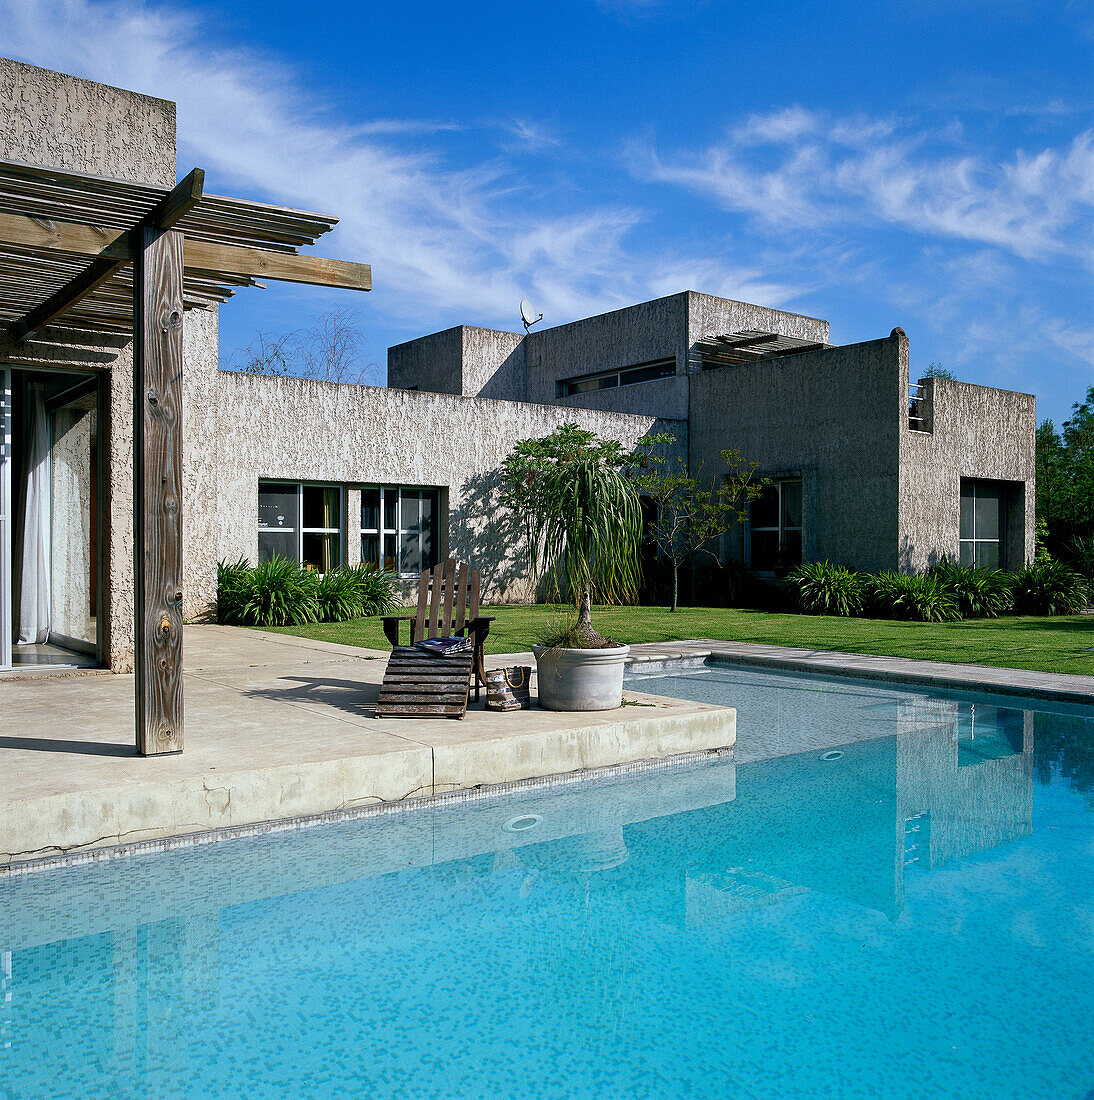 Facade of textured concrete building with swimming pool